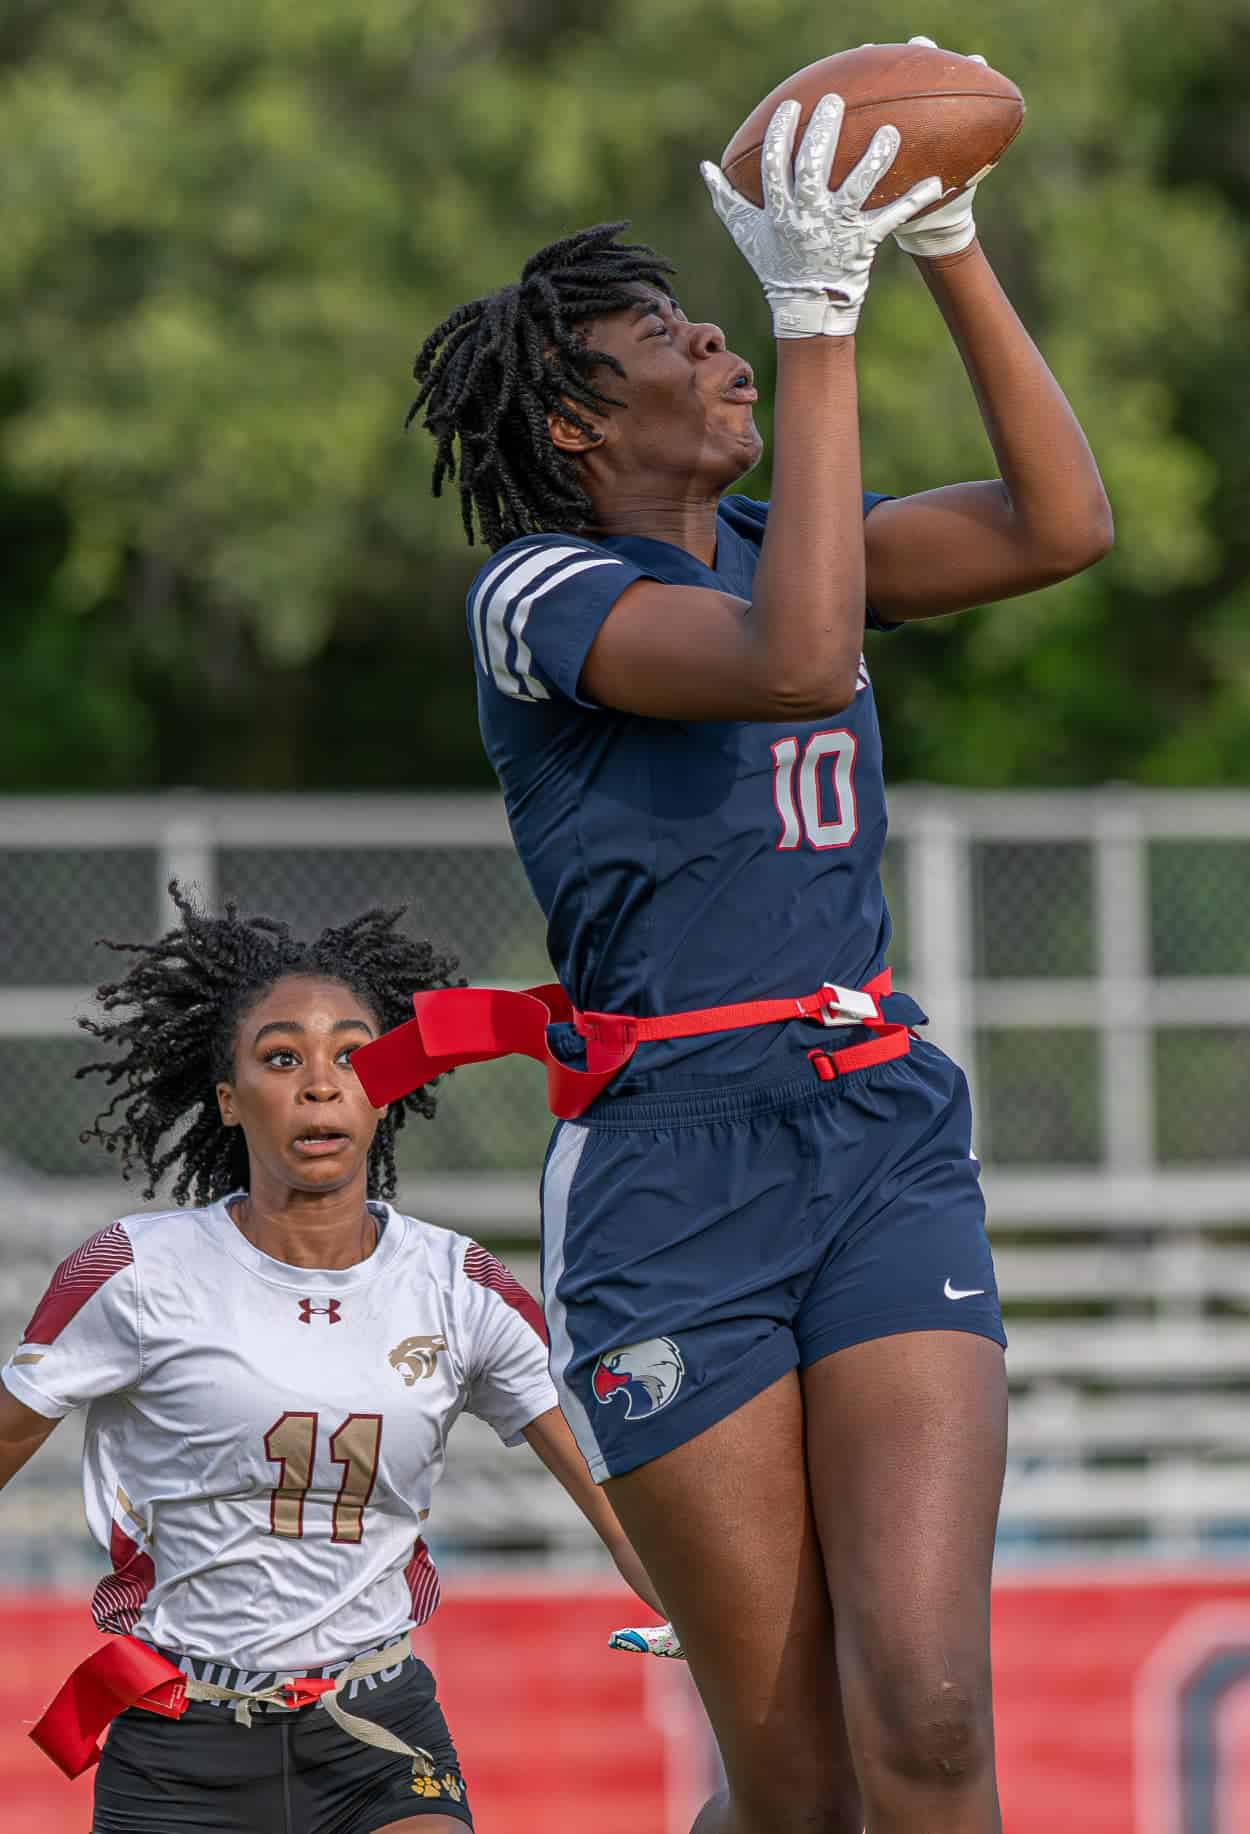 Springstead High, 10, Malanie Francis leaps for a reception during the Eagles 36-0 win at home in the 2A District 14 playoff match. Photo by [Joseph Dicristofalo]